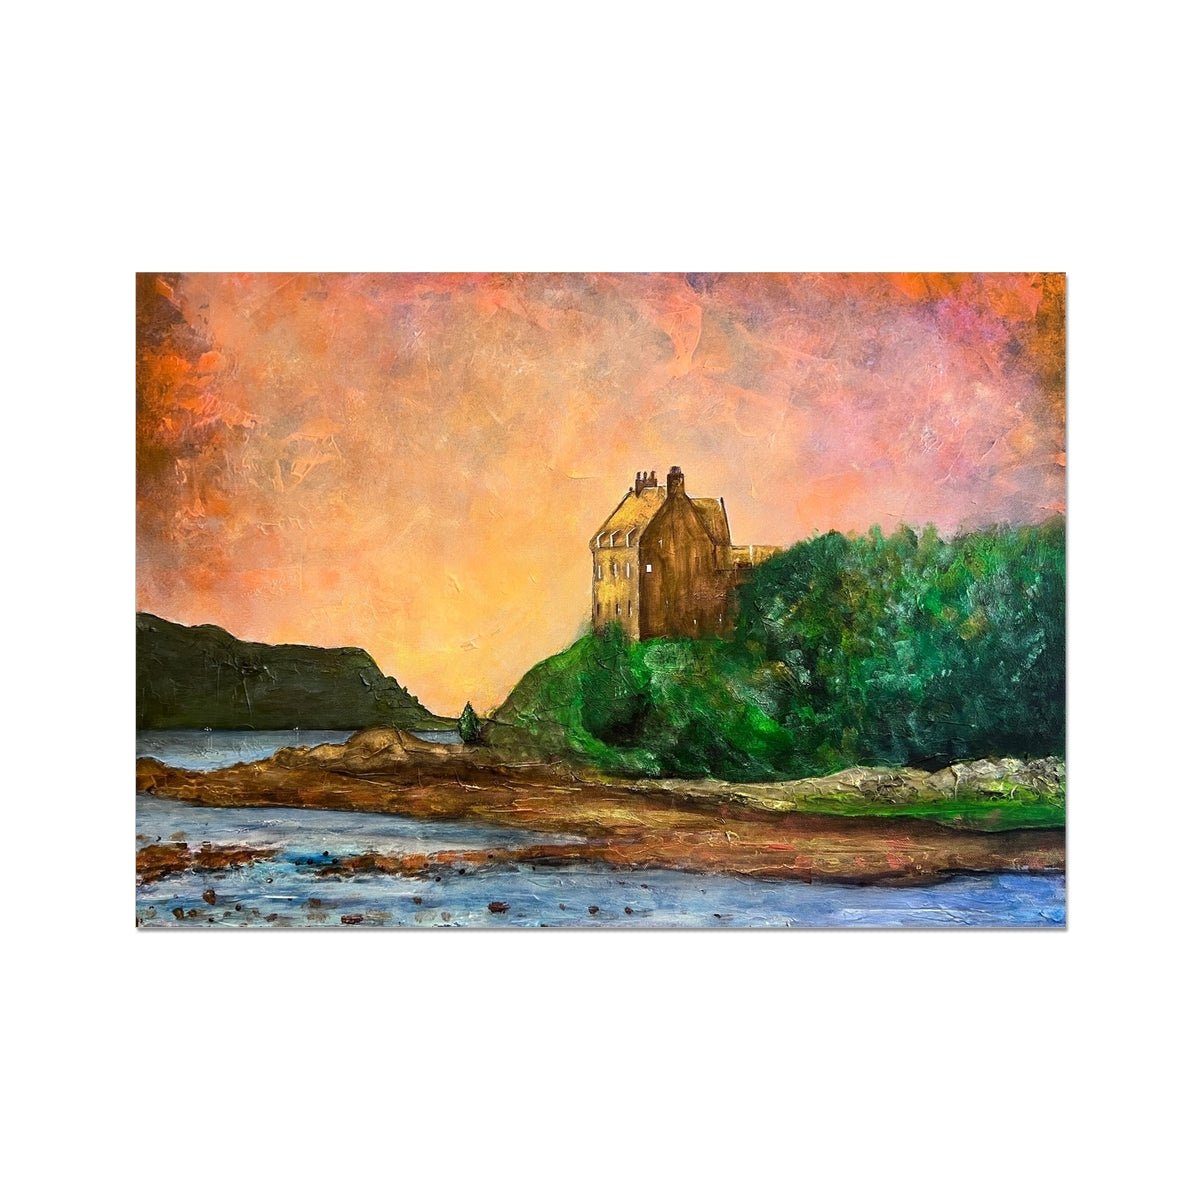 Duntrune Castle Painting | Fine Art Prints From Scotland-Unframed Prints-Historic & Iconic Scotland Art Gallery-A2 Landscape-Paintings, Prints, Homeware, Art Gifts From Scotland By Scottish Artist Kevin Hunter